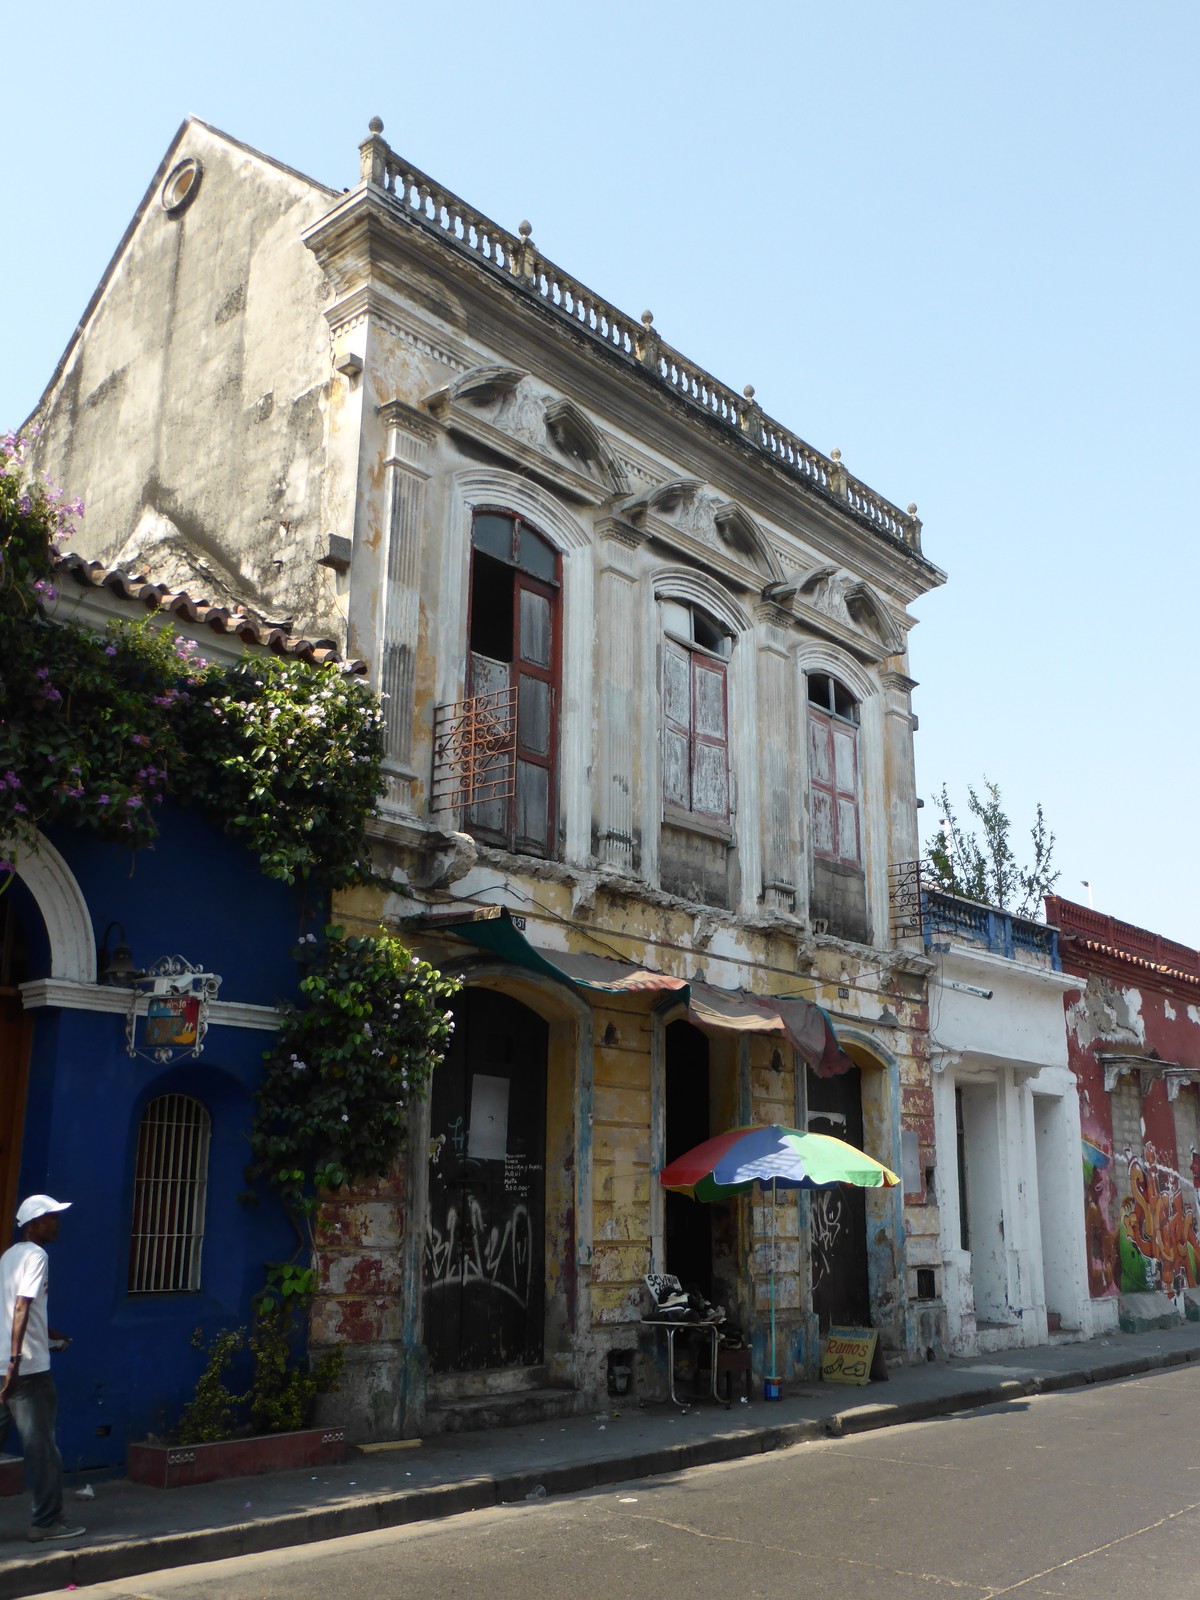 The architecture is slightly more worn in Getsemaní